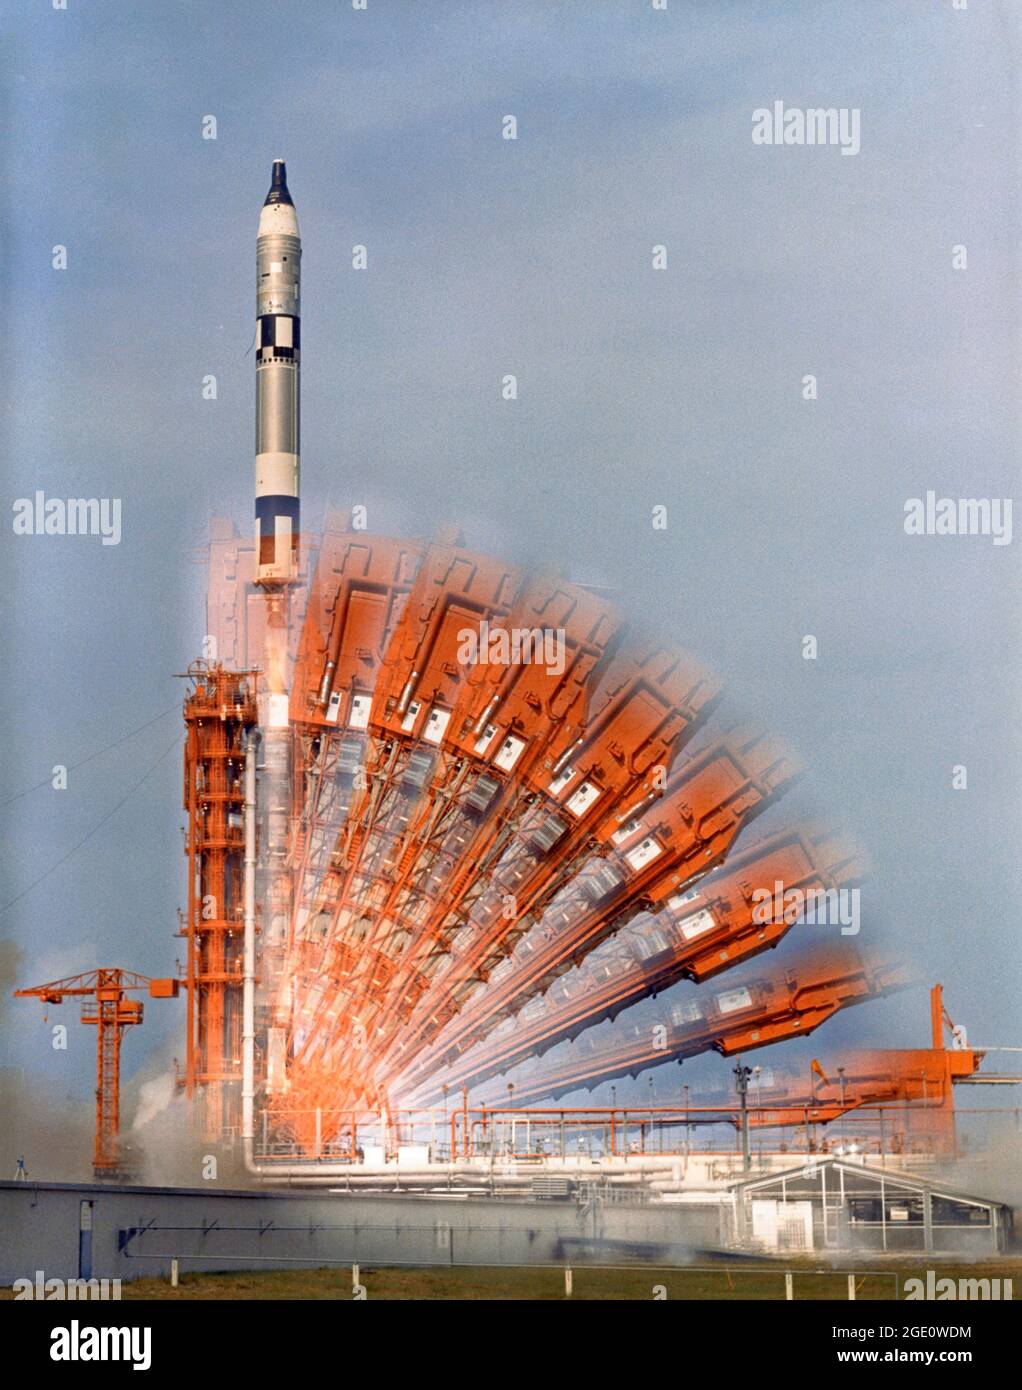 Gemini 10 Time Lapse Description A time-exposure photograph shows the configuration of Pad 19 up until the launch of Gemini 10. Onboard the spacecraft are John W. Young and Michael Collins. The two astronauts would spend almost three days practicing docking with the Agena target vehicle and conducting a number of experiments. Stock Photo